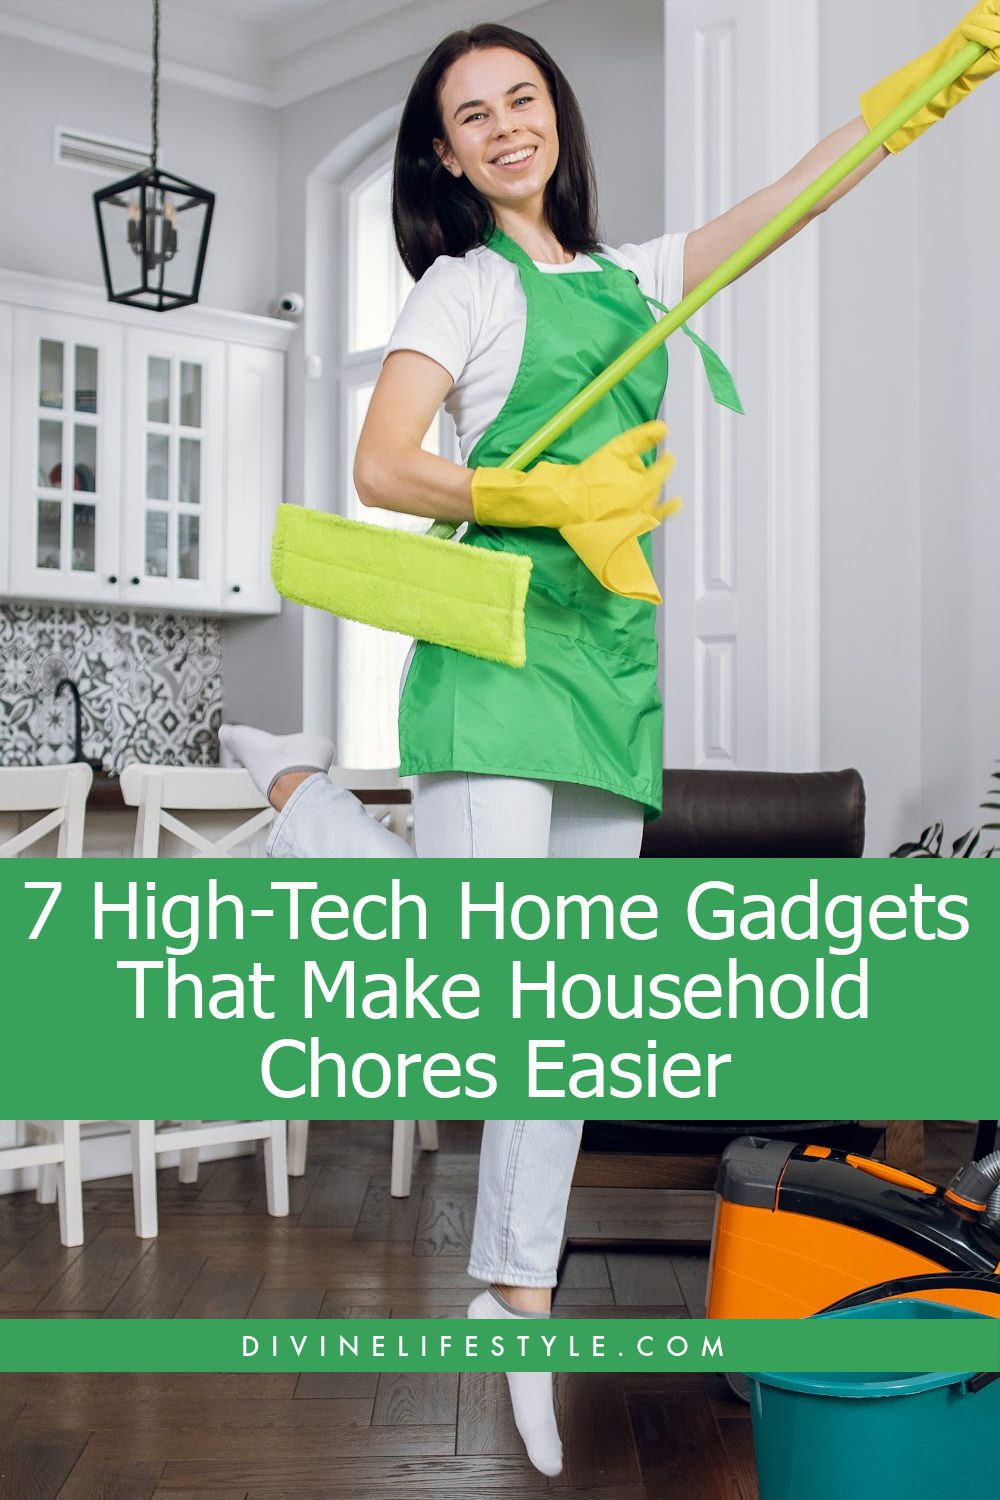 https://divinelifestyle.com/wp-content/uploads/2021/10/7-High-Tech-Home-Gadgets-That-Make-Household-Chores-Easier.jpg